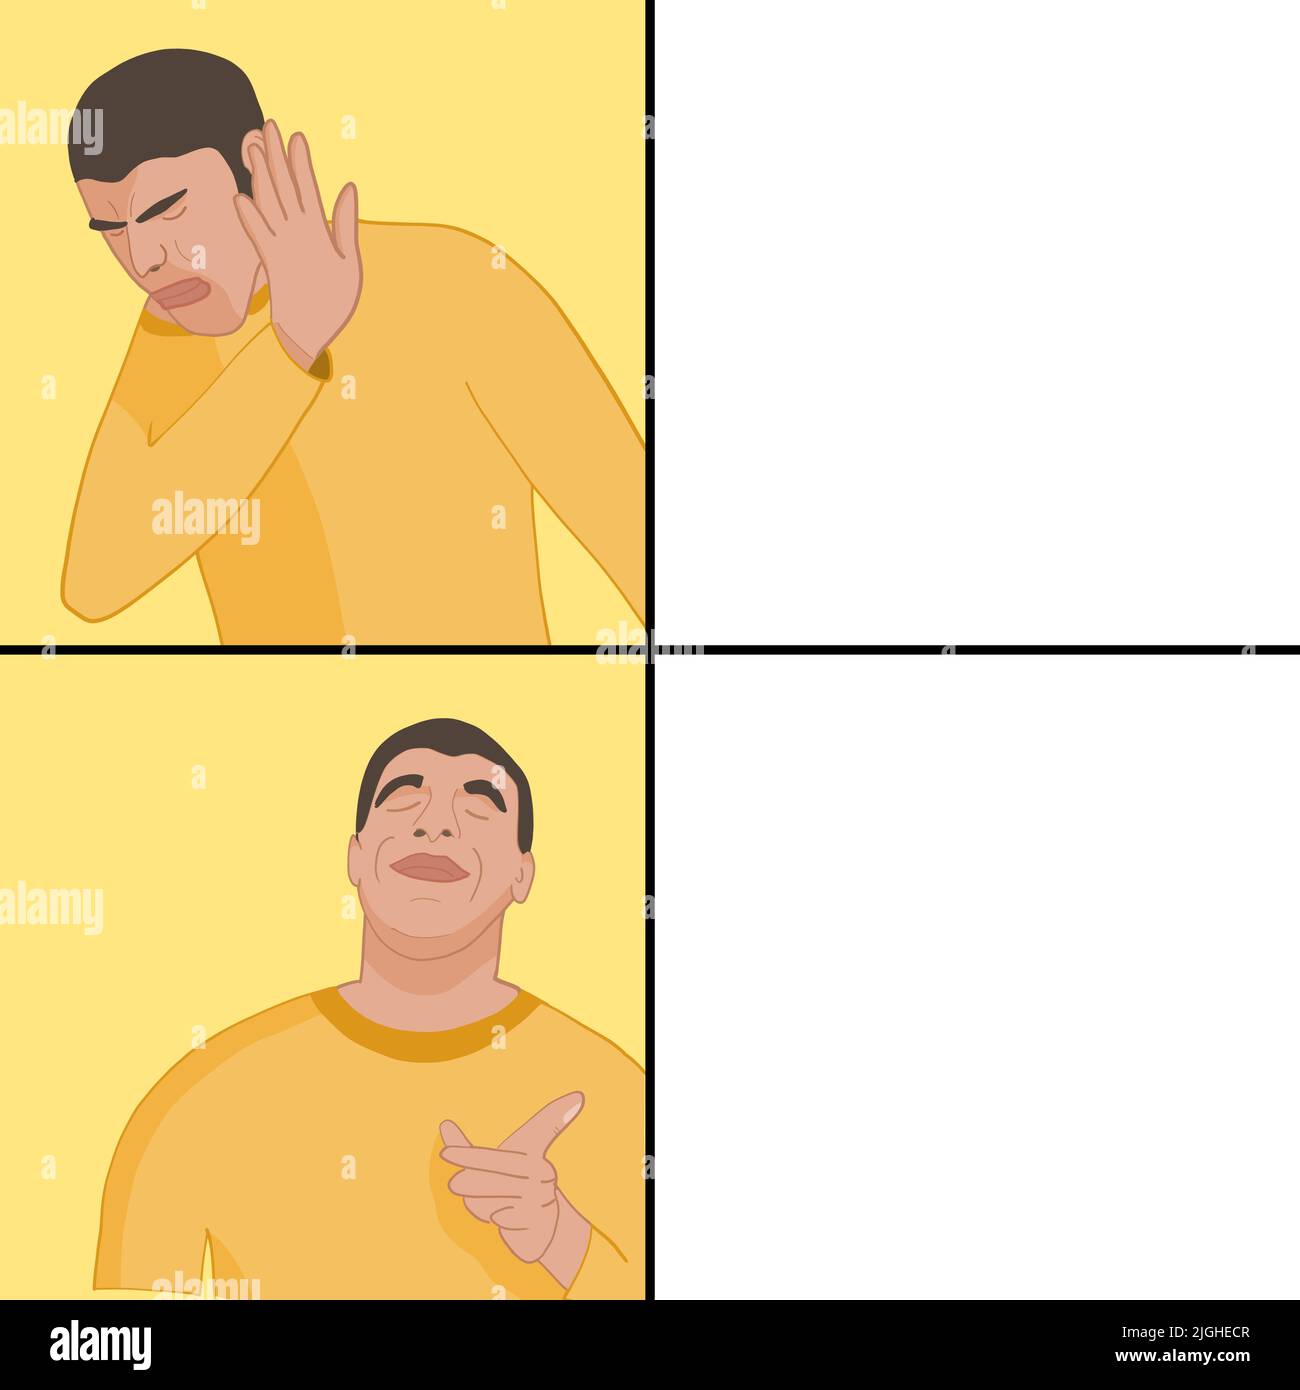 Funny meme template for social media sharing. Disliking one thing and liking another thing. Stock Vector